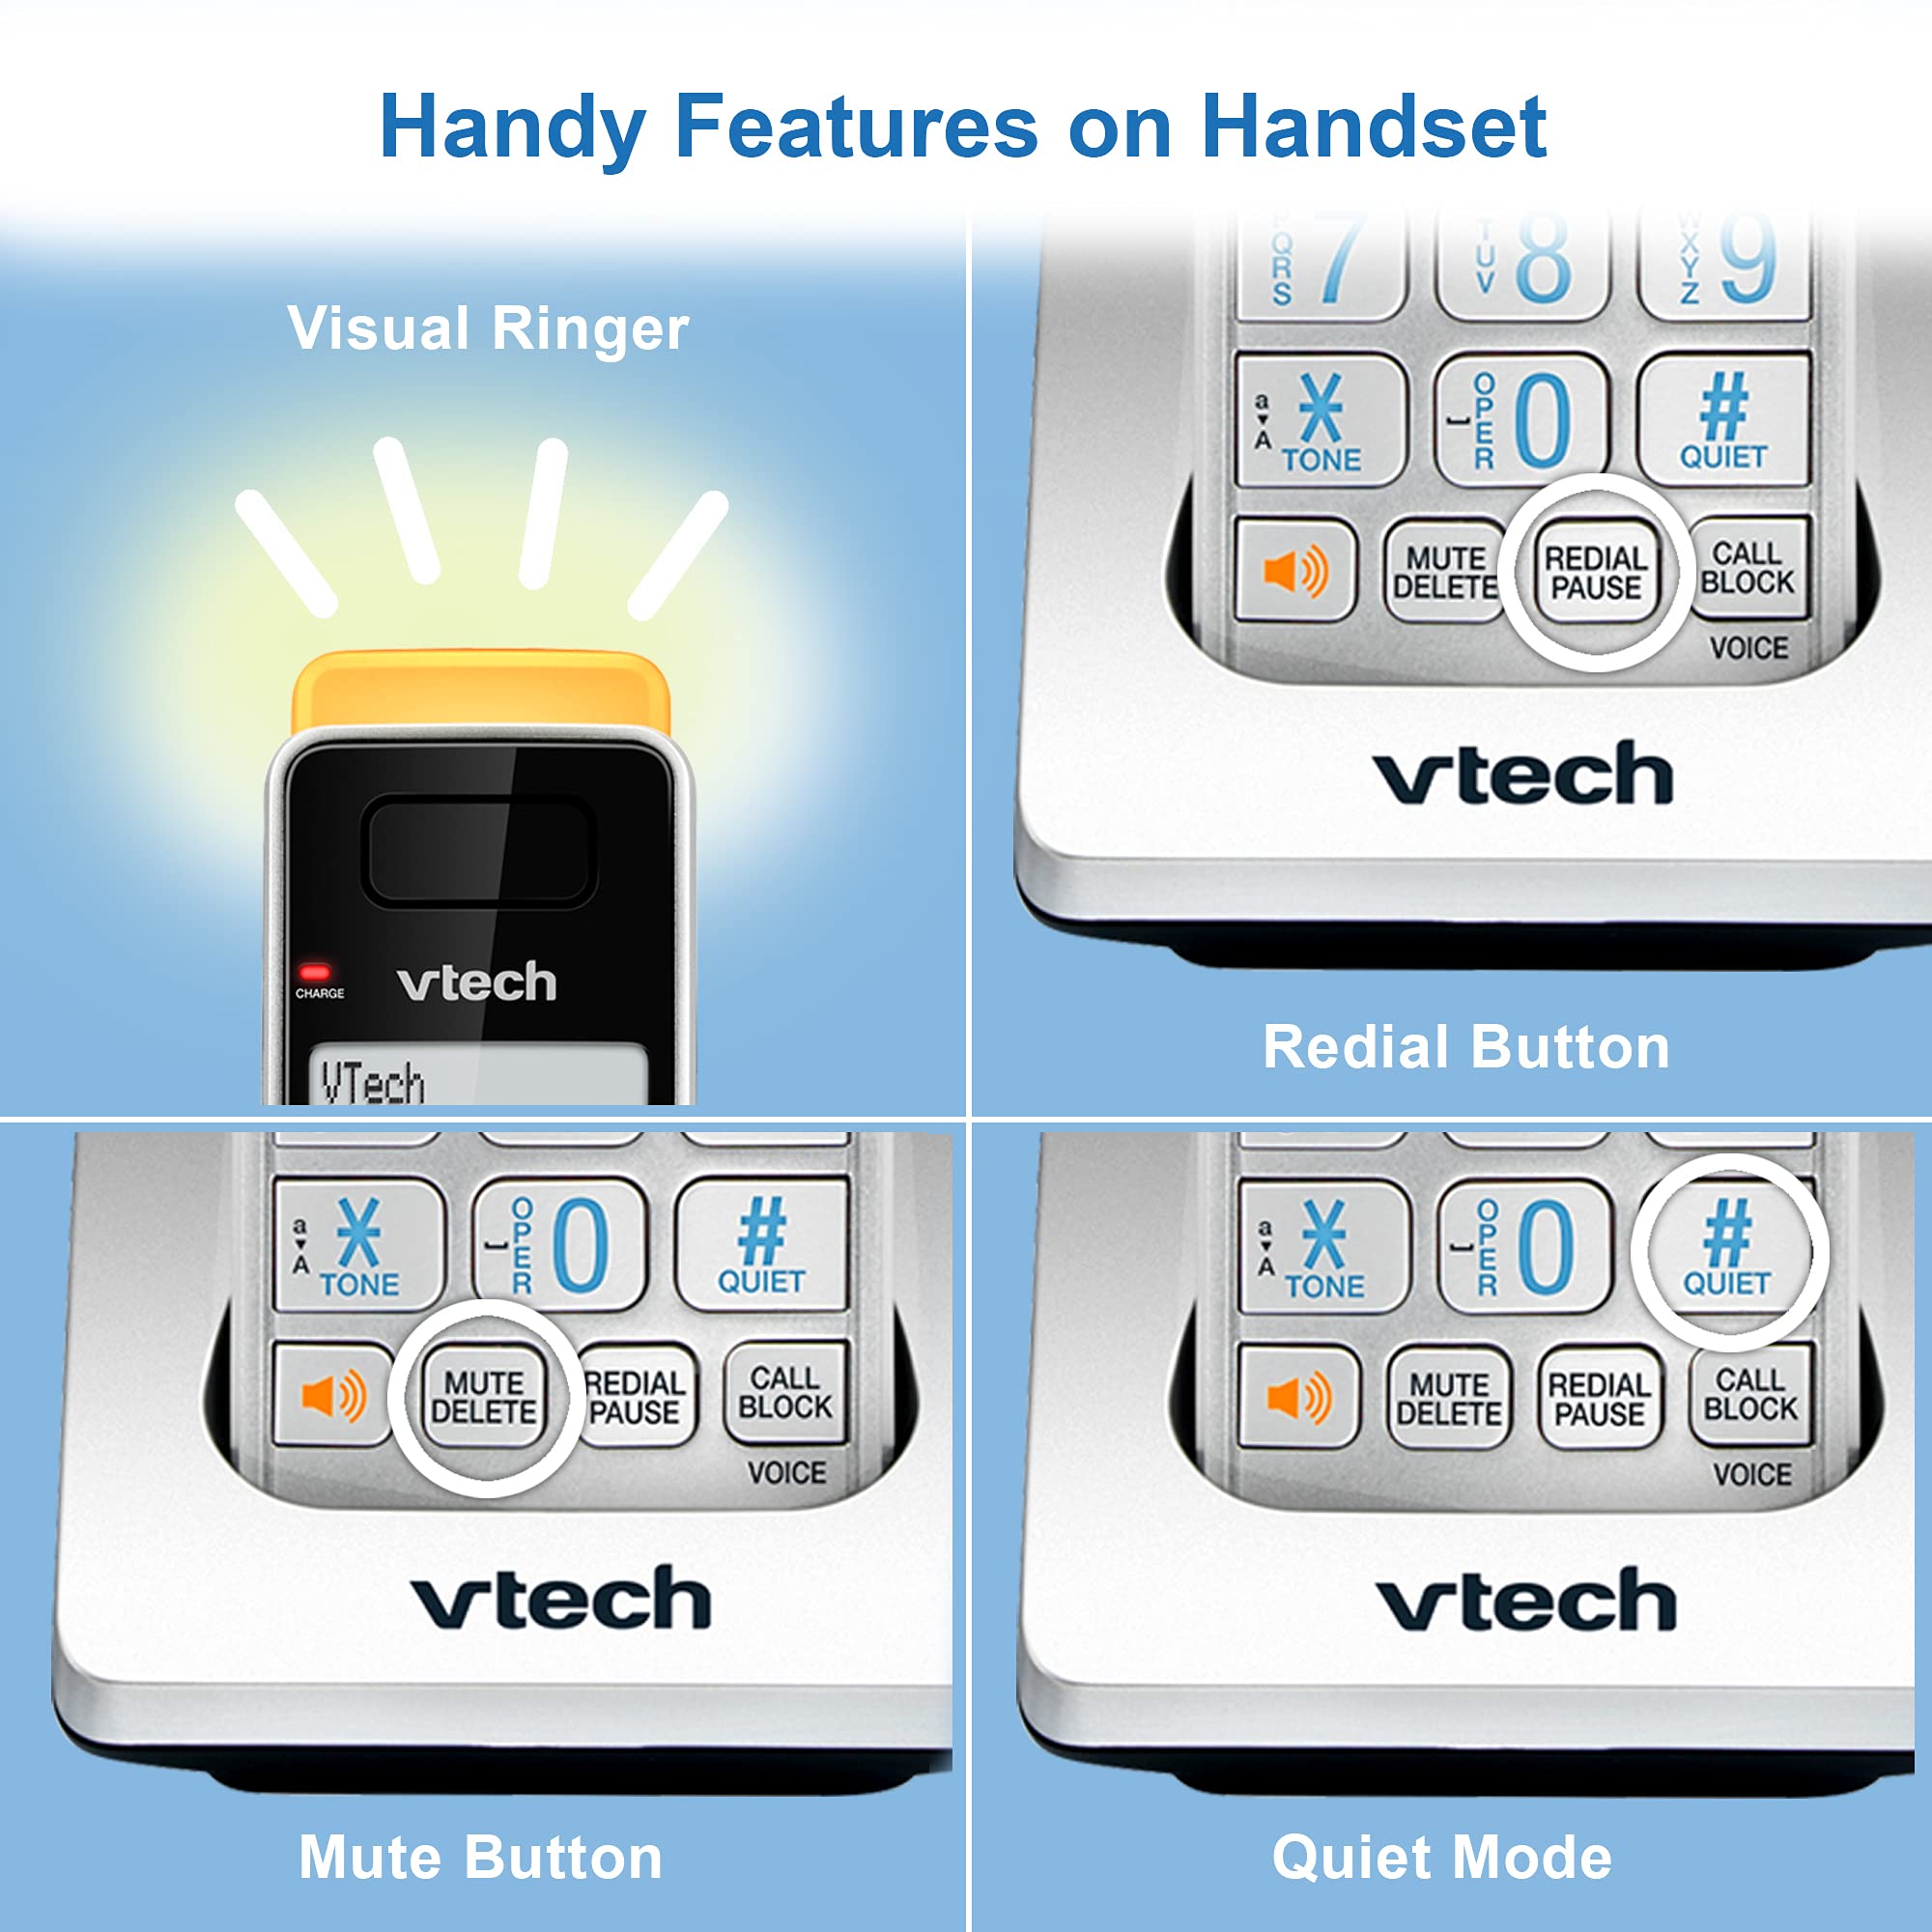 VTECH IS8121-2 Super Long Range up to 2300 Feet DECT 6.0 Bluetooth 2 Handset Cordless Phone for Home with Answering Machine, Call Blocking, Connect to Cell, Intercom and Expandable to 5 Handsets